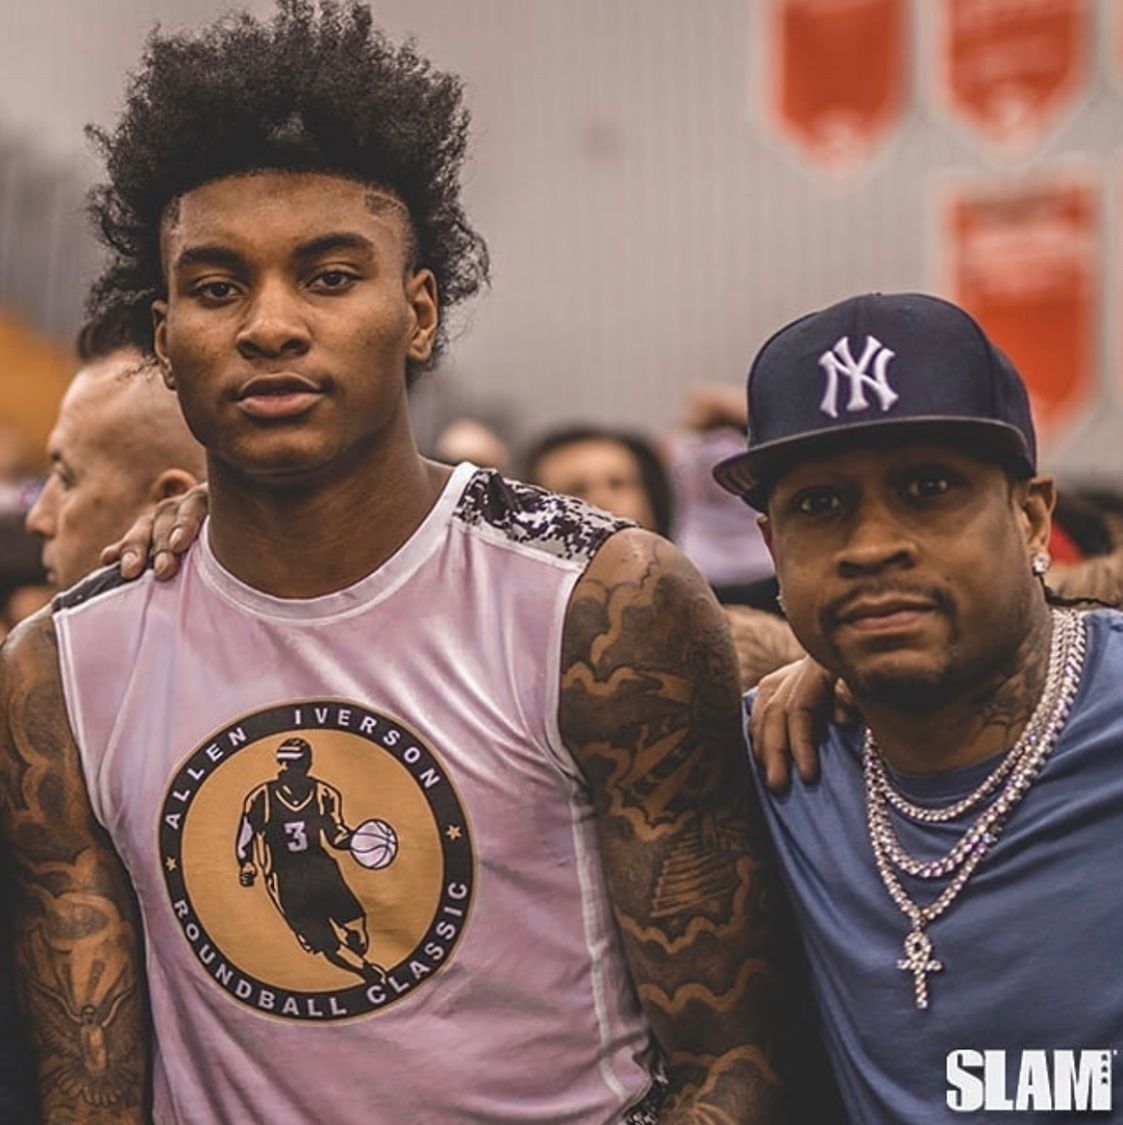 Kevin Porter jr Seattle Product heading to USC kicking it with Allen Iverson at Allen Iverson brand classic. Kevin porter, Allen iverson, Kicks